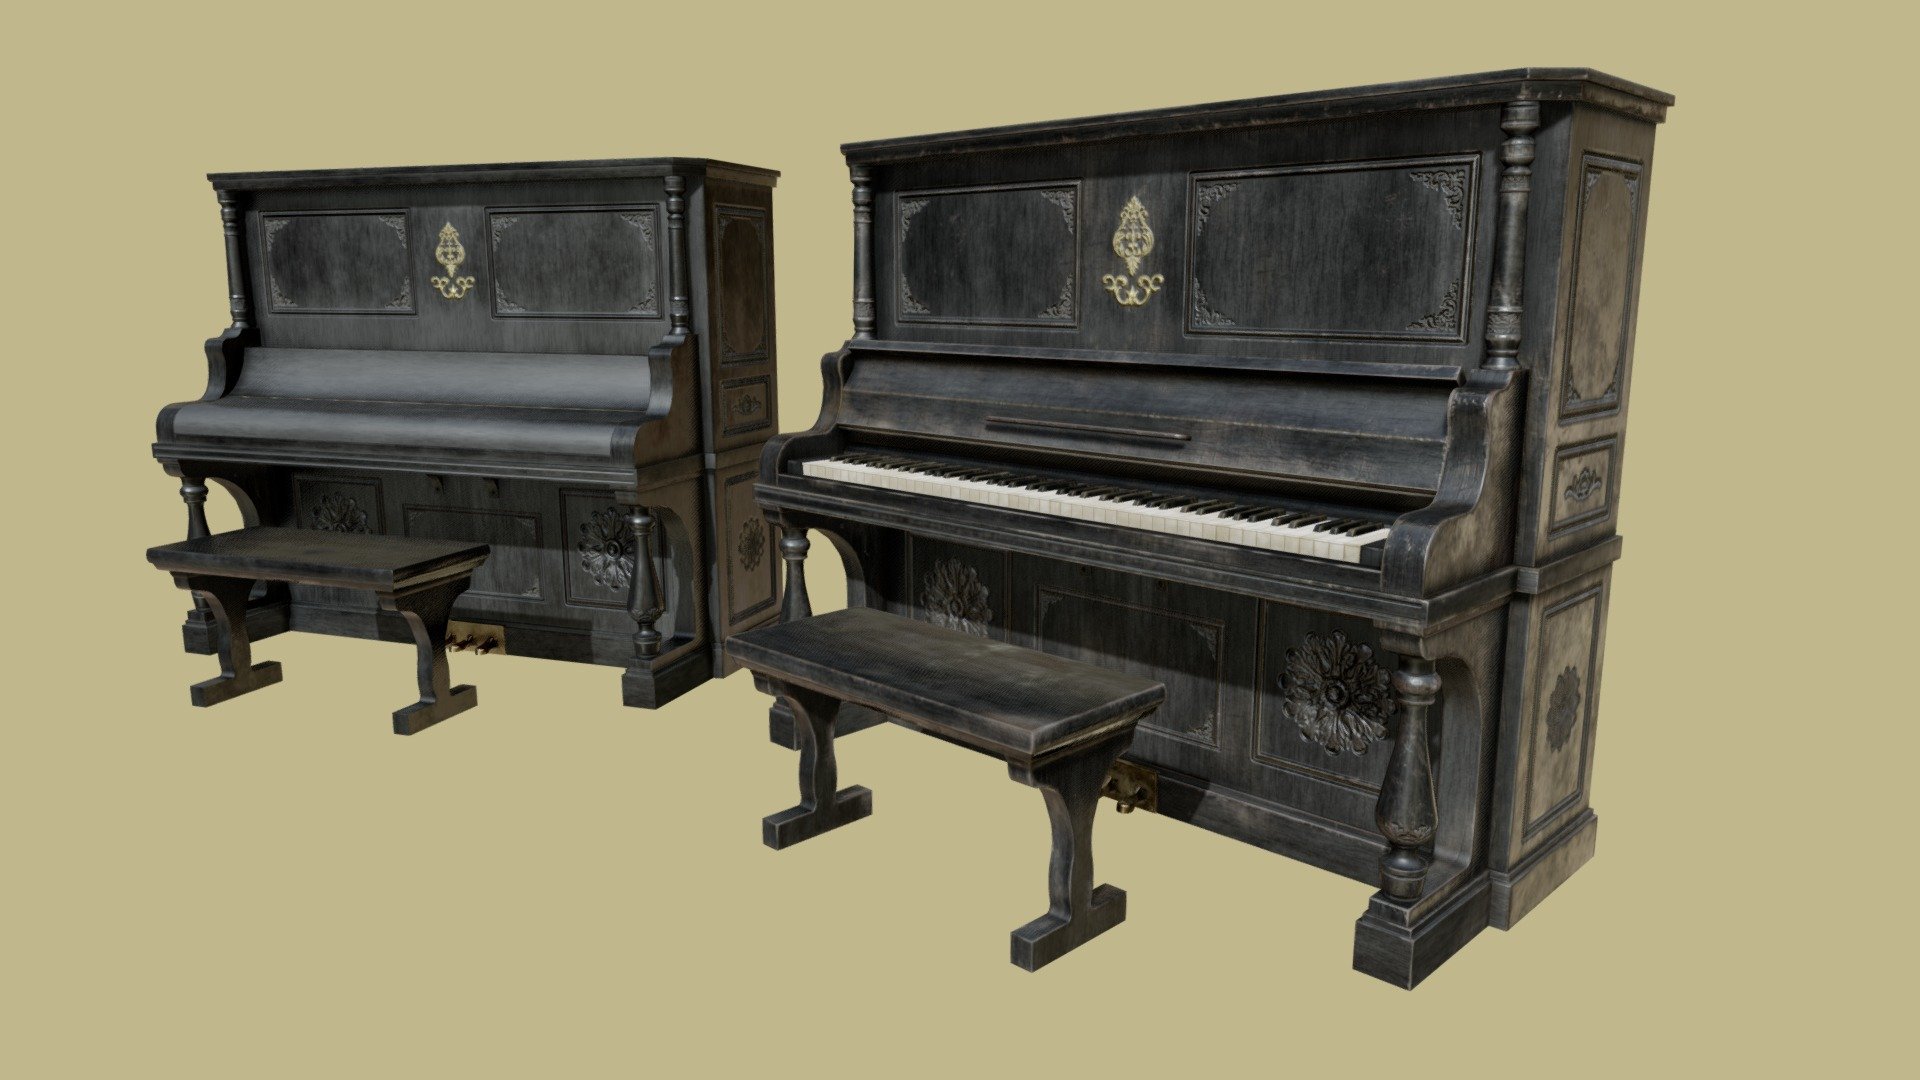 An Upright Piano Set with two, 1K-4K Texture variations (&ldquo;old